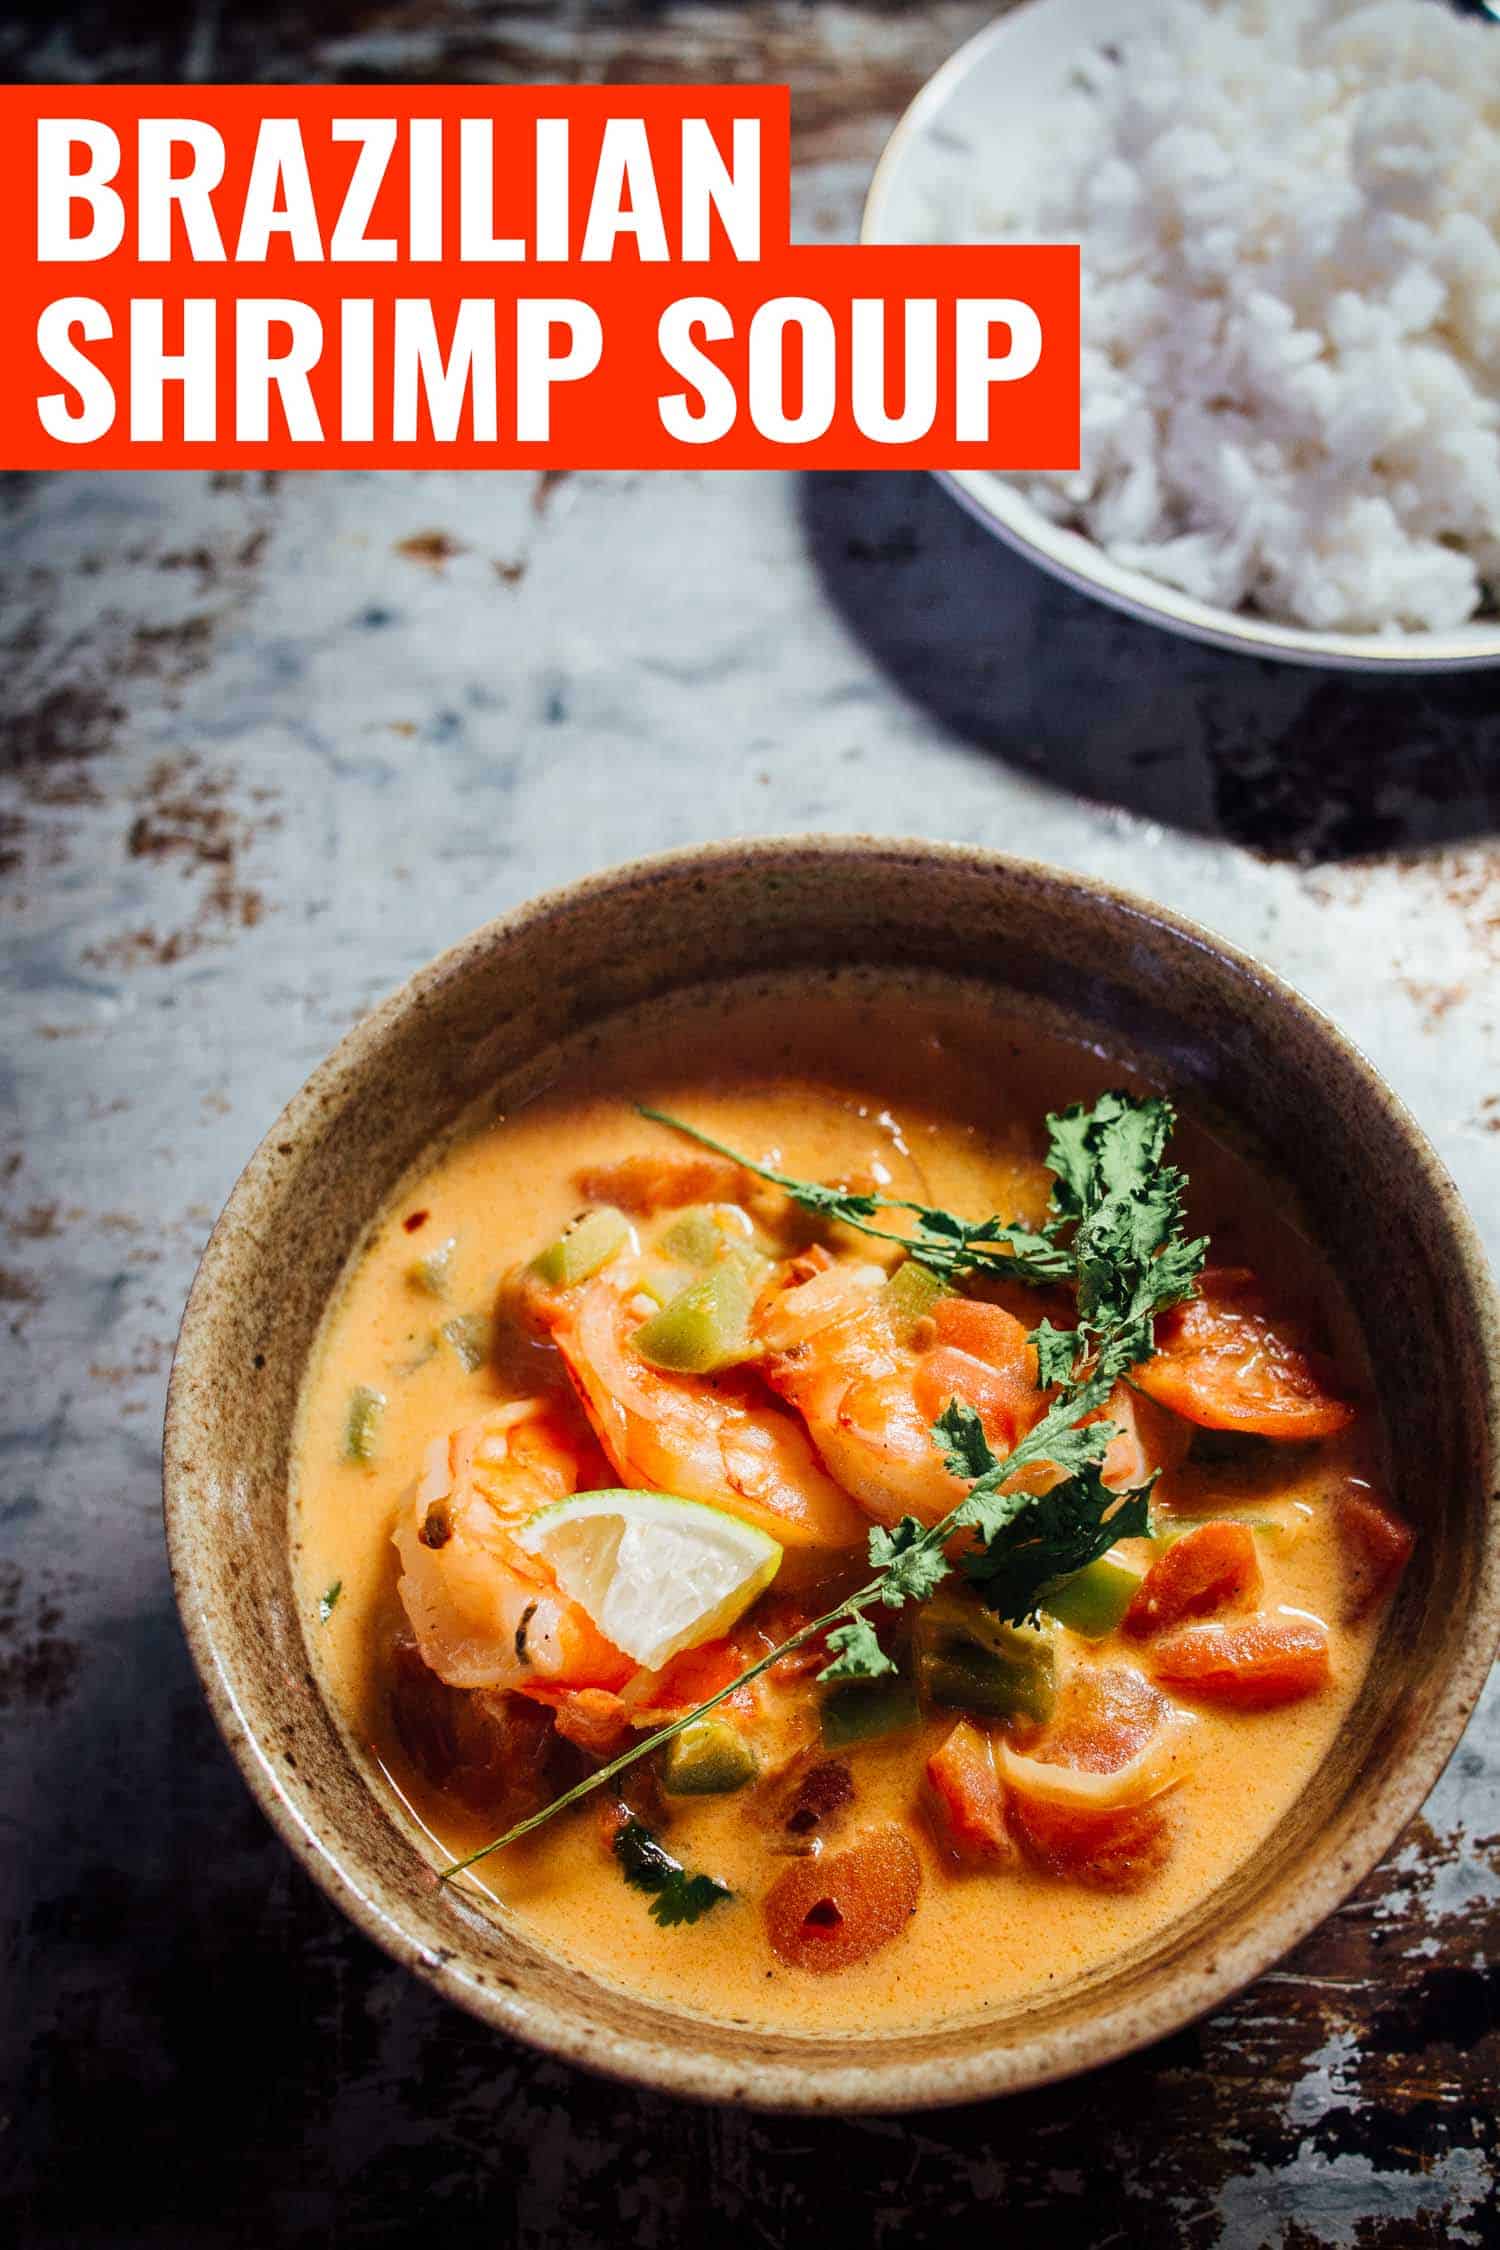 Brazilian shrimp soup in a white bowl on a rustic background